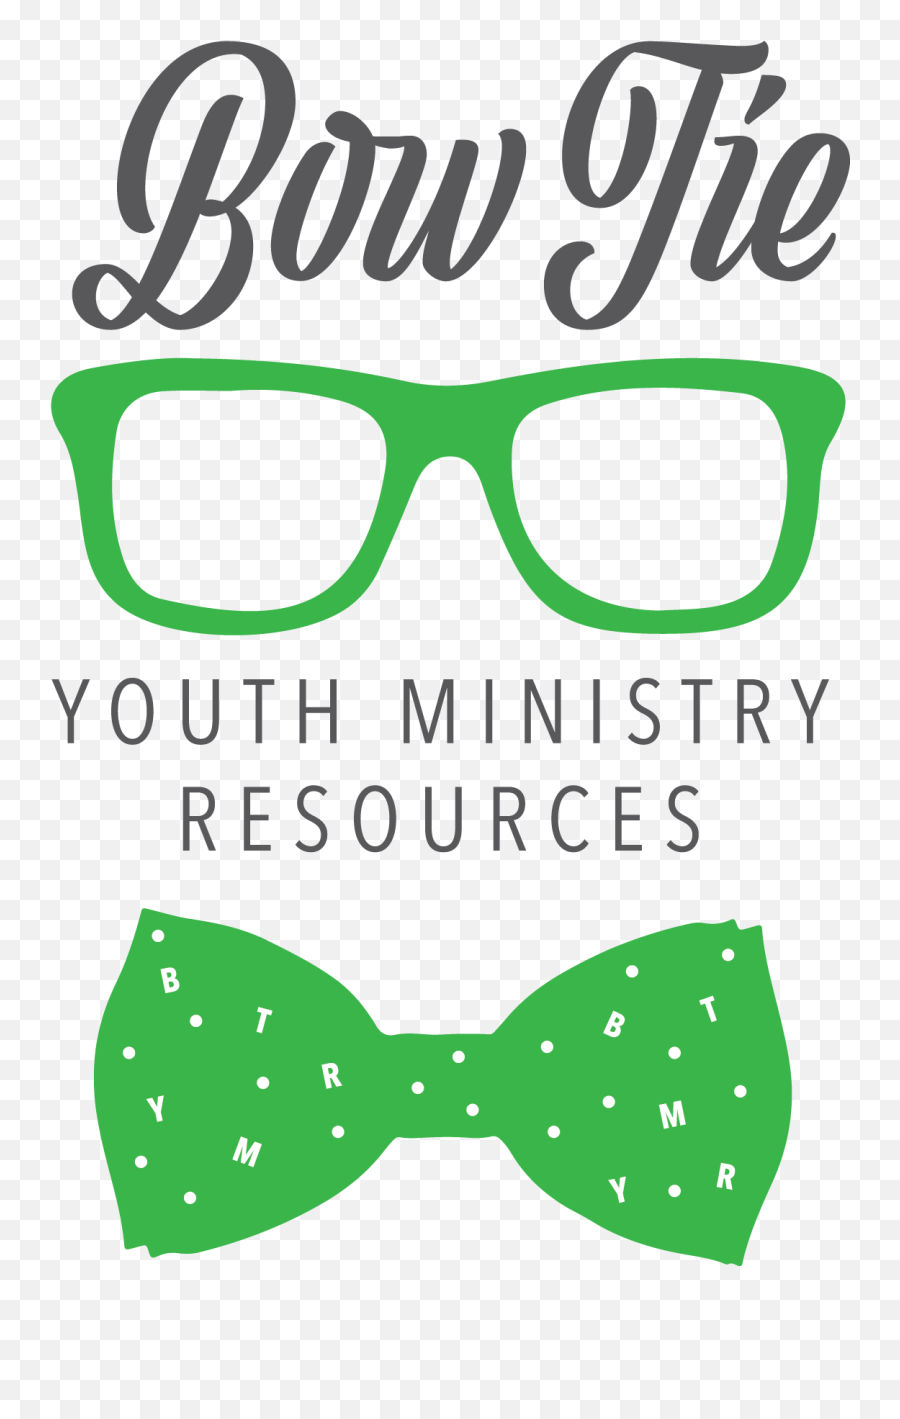 Bow Tie Youth Ministry Resources Emoji,Youth Ministries Logo